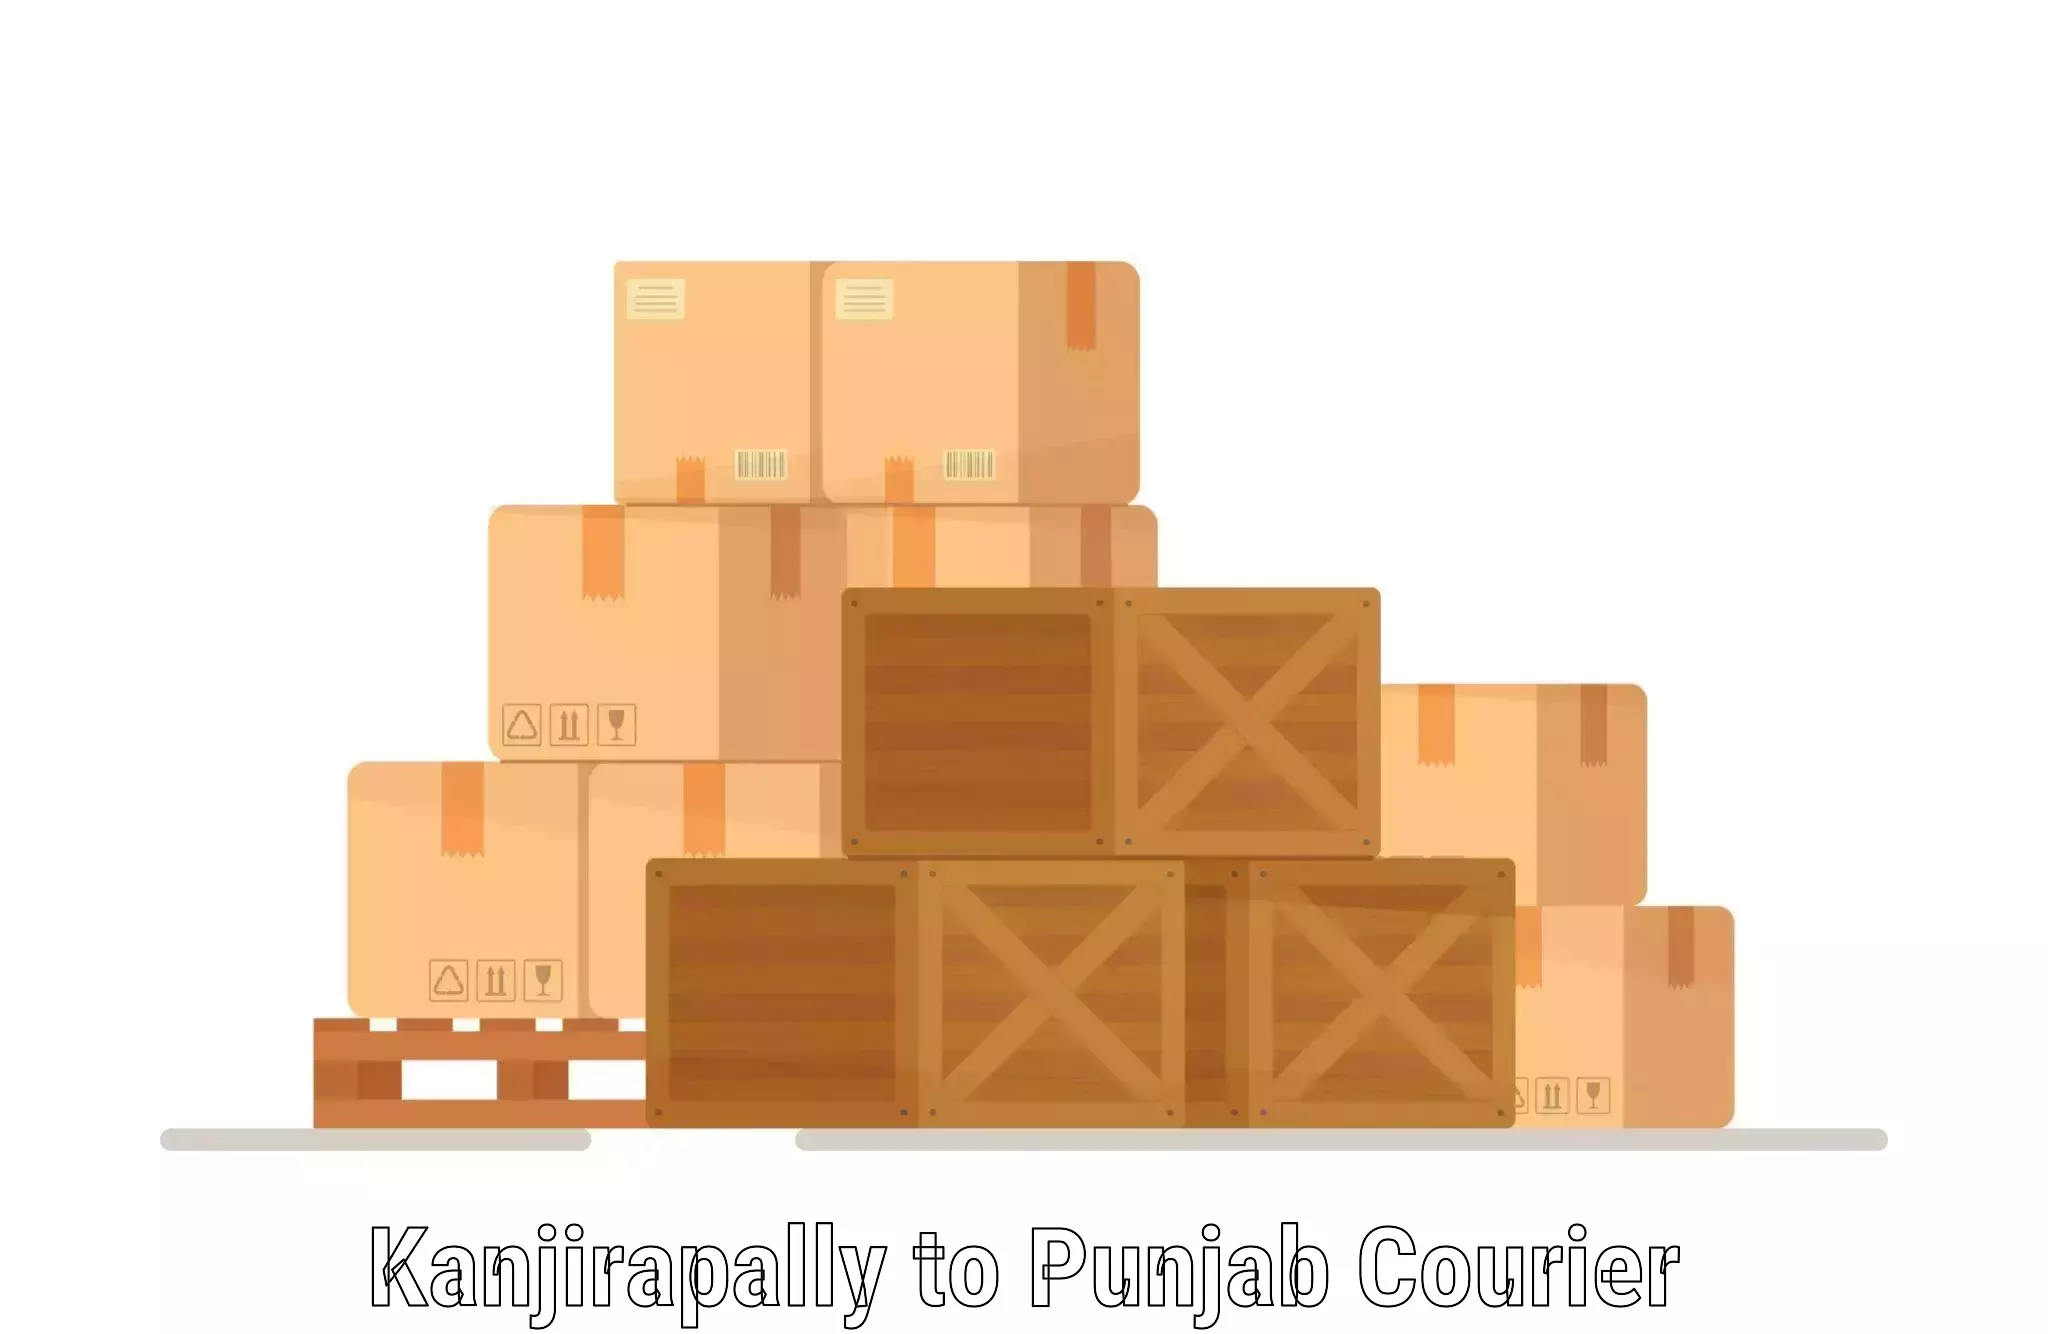 Customized shipping options in Kanjirapally to Gurdaspur